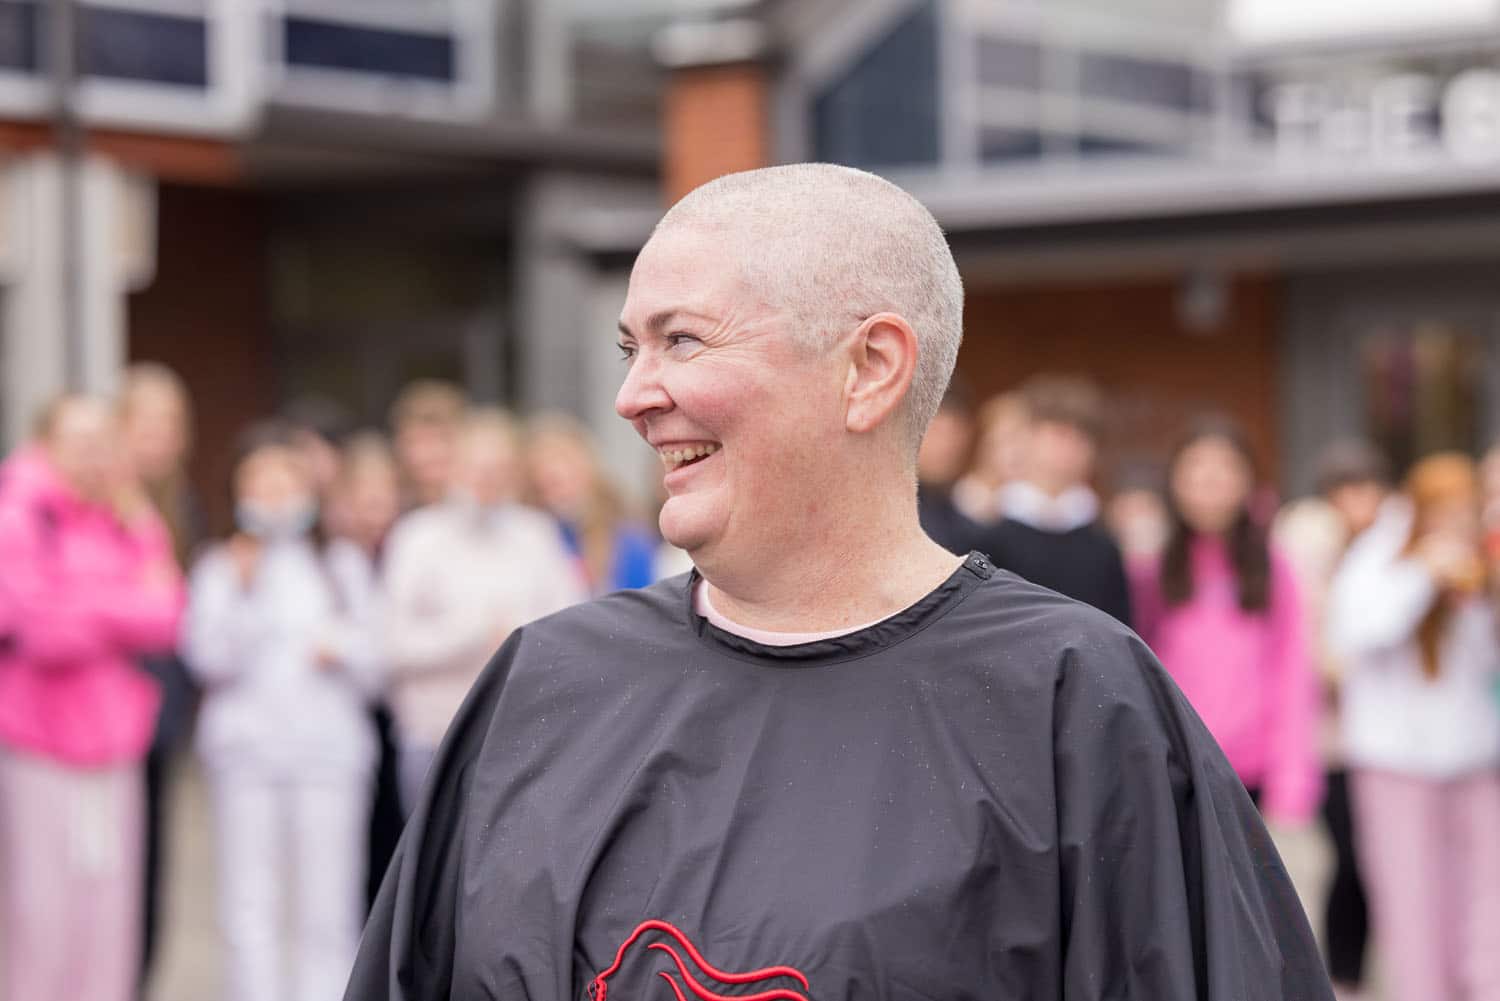 Jo laughs after having her head shaved. Students in background.